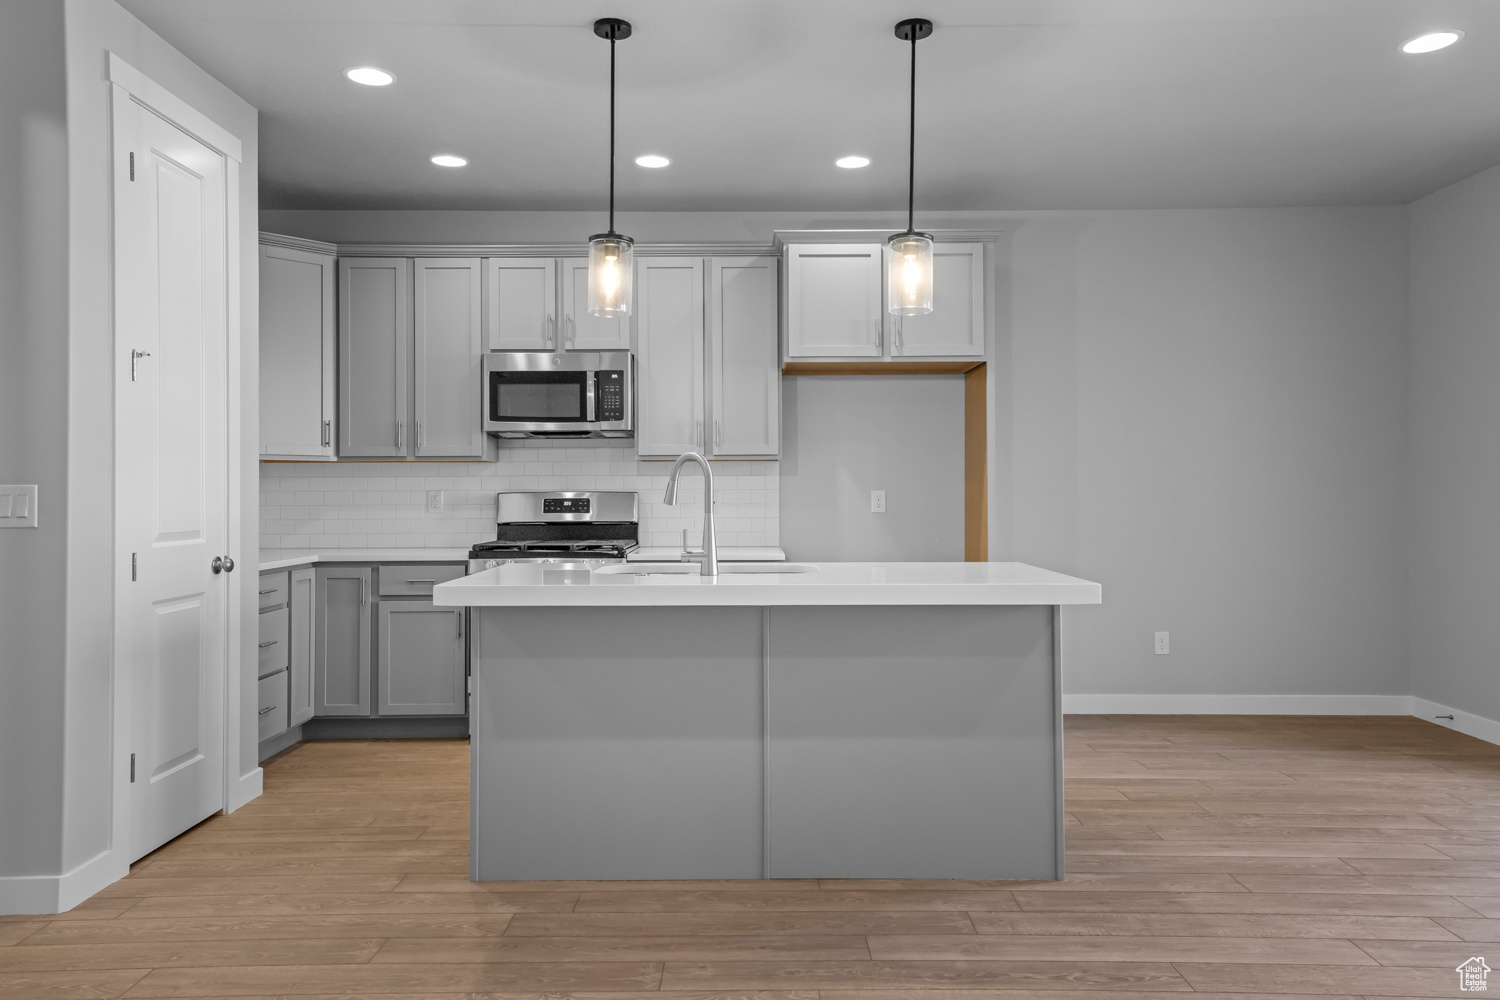 Kitchen with appliances with stainless steel finishes, light hardwood / wood-style floors, tasteful backsplash, a kitchen island with sink, and pendant lighting